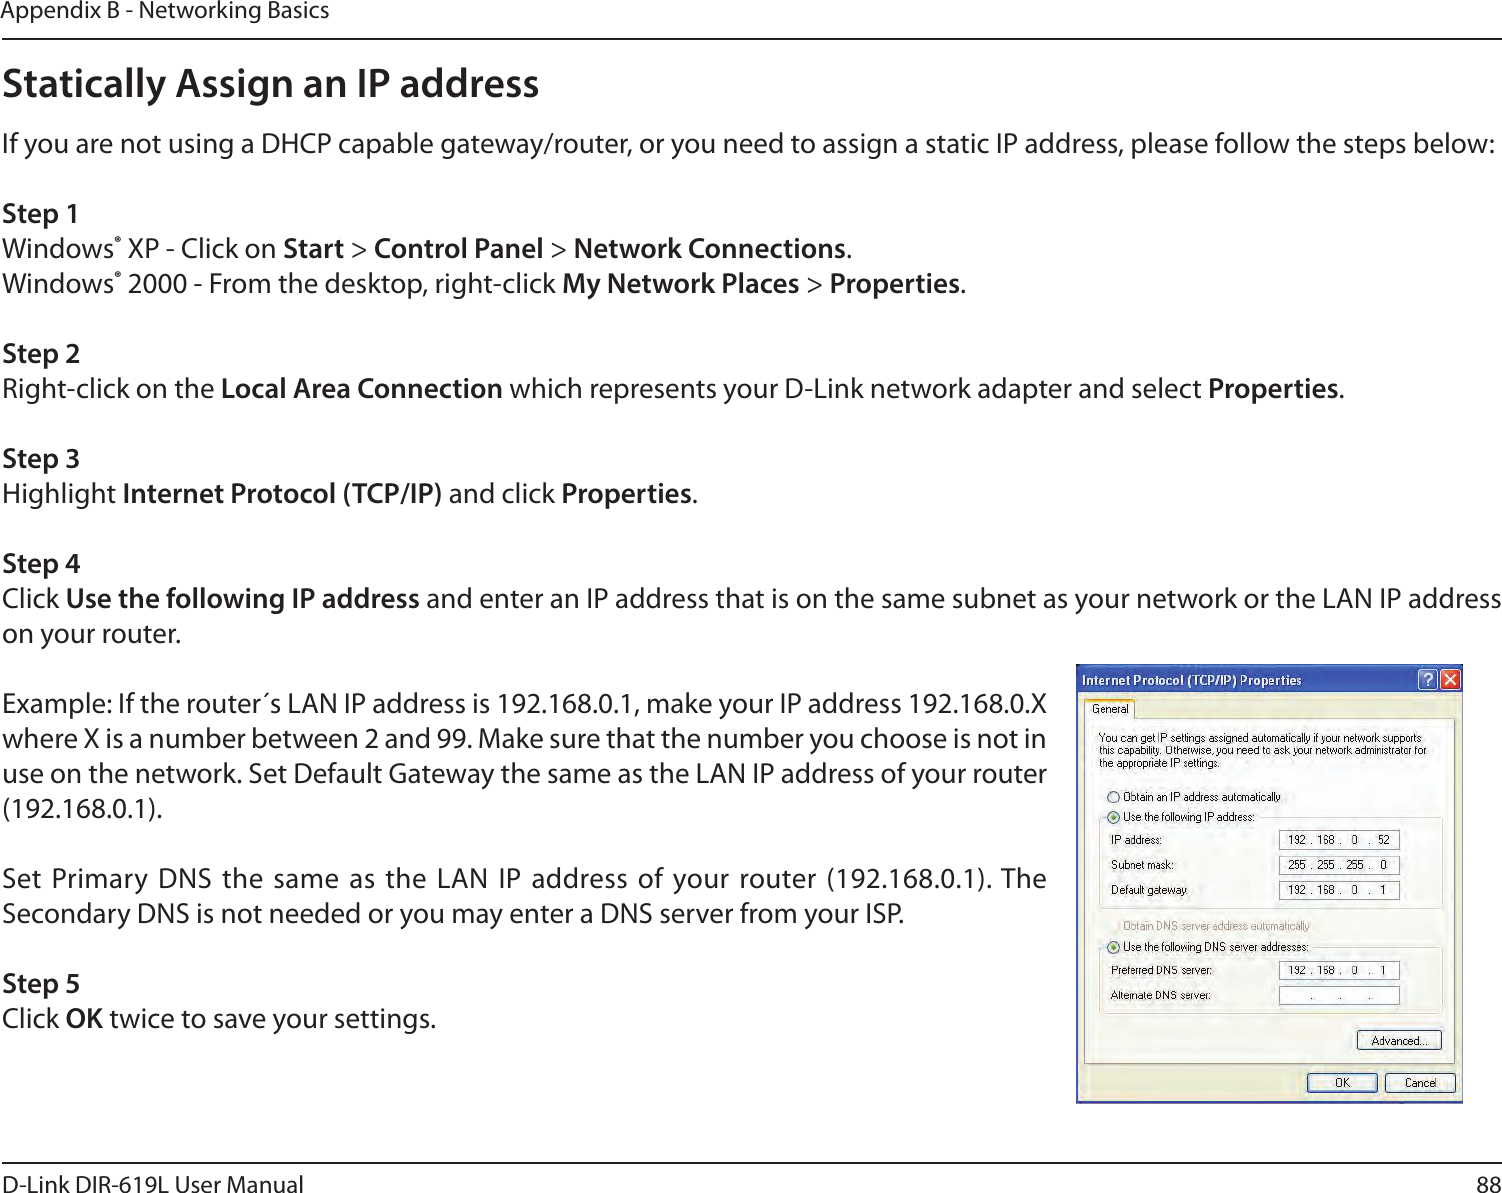 88D-Link DIR-619L User ManualAppendix B - Networking BasicsStatically Assign an IP addressIf you are not using a DHCP capable gateway/router, or you need to assign a static IP address, please follow the steps below:Step 1Windows® XP - Click on Start &gt; Control Panel &gt; Network Connections.Windows® 2000 - From the desktop, right-click My Network Places &gt; Properties.Step 2Right-click on the Local Area Connection which represents your D-Link network adapter and select Properties.Step 3Highlight Internet Protocol (TCP/IP) and click Properties.Step 4Click Use the following IP address and enter an IP address that is on the same subnet as your network or the LAN IP address on your router. Example: If the router´s LAN IP address is 192.168.0.1, make your IP address 192.168.0.X where X is a number between 2 and 99. Make sure that the number you choose is not in use on the network. Set Default Gateway the same as the LAN IP address of your router (192.168.0.1). Set Primary DNS the same as the LAN IP address of  your router (192.168.0.1). The Secondary DNS is not needed or you may enter a DNS server from your ISP.Step 5Click OK twice to save your settings.